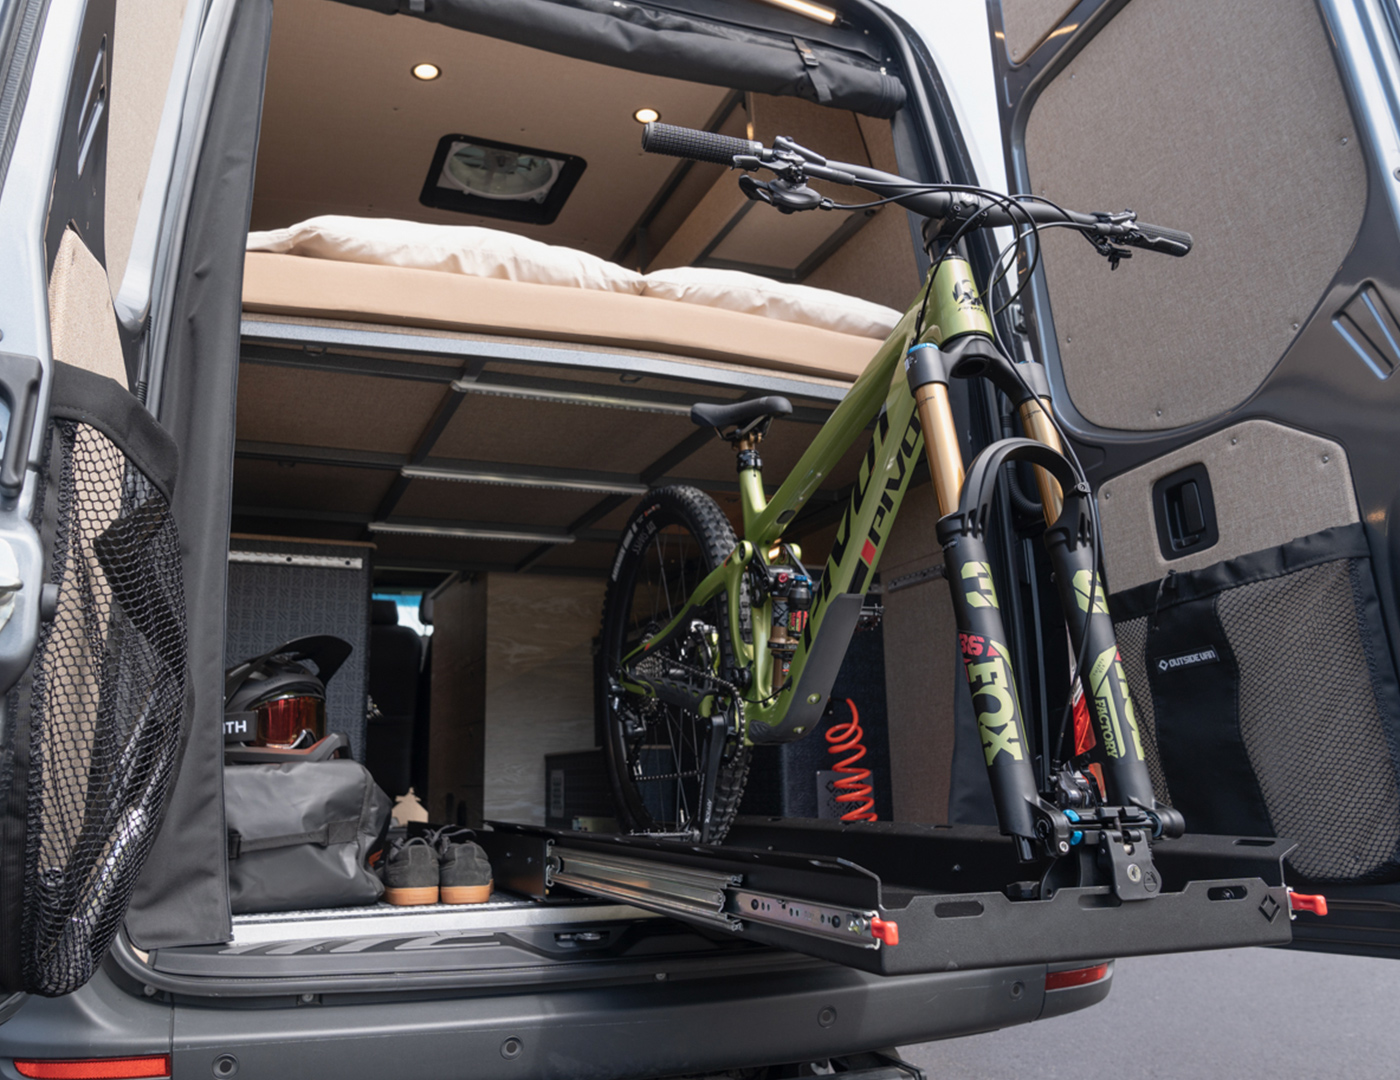 Green pivot mountain bike on an outside van gear glider slide out tray in the garage of a custom converted sprinter van